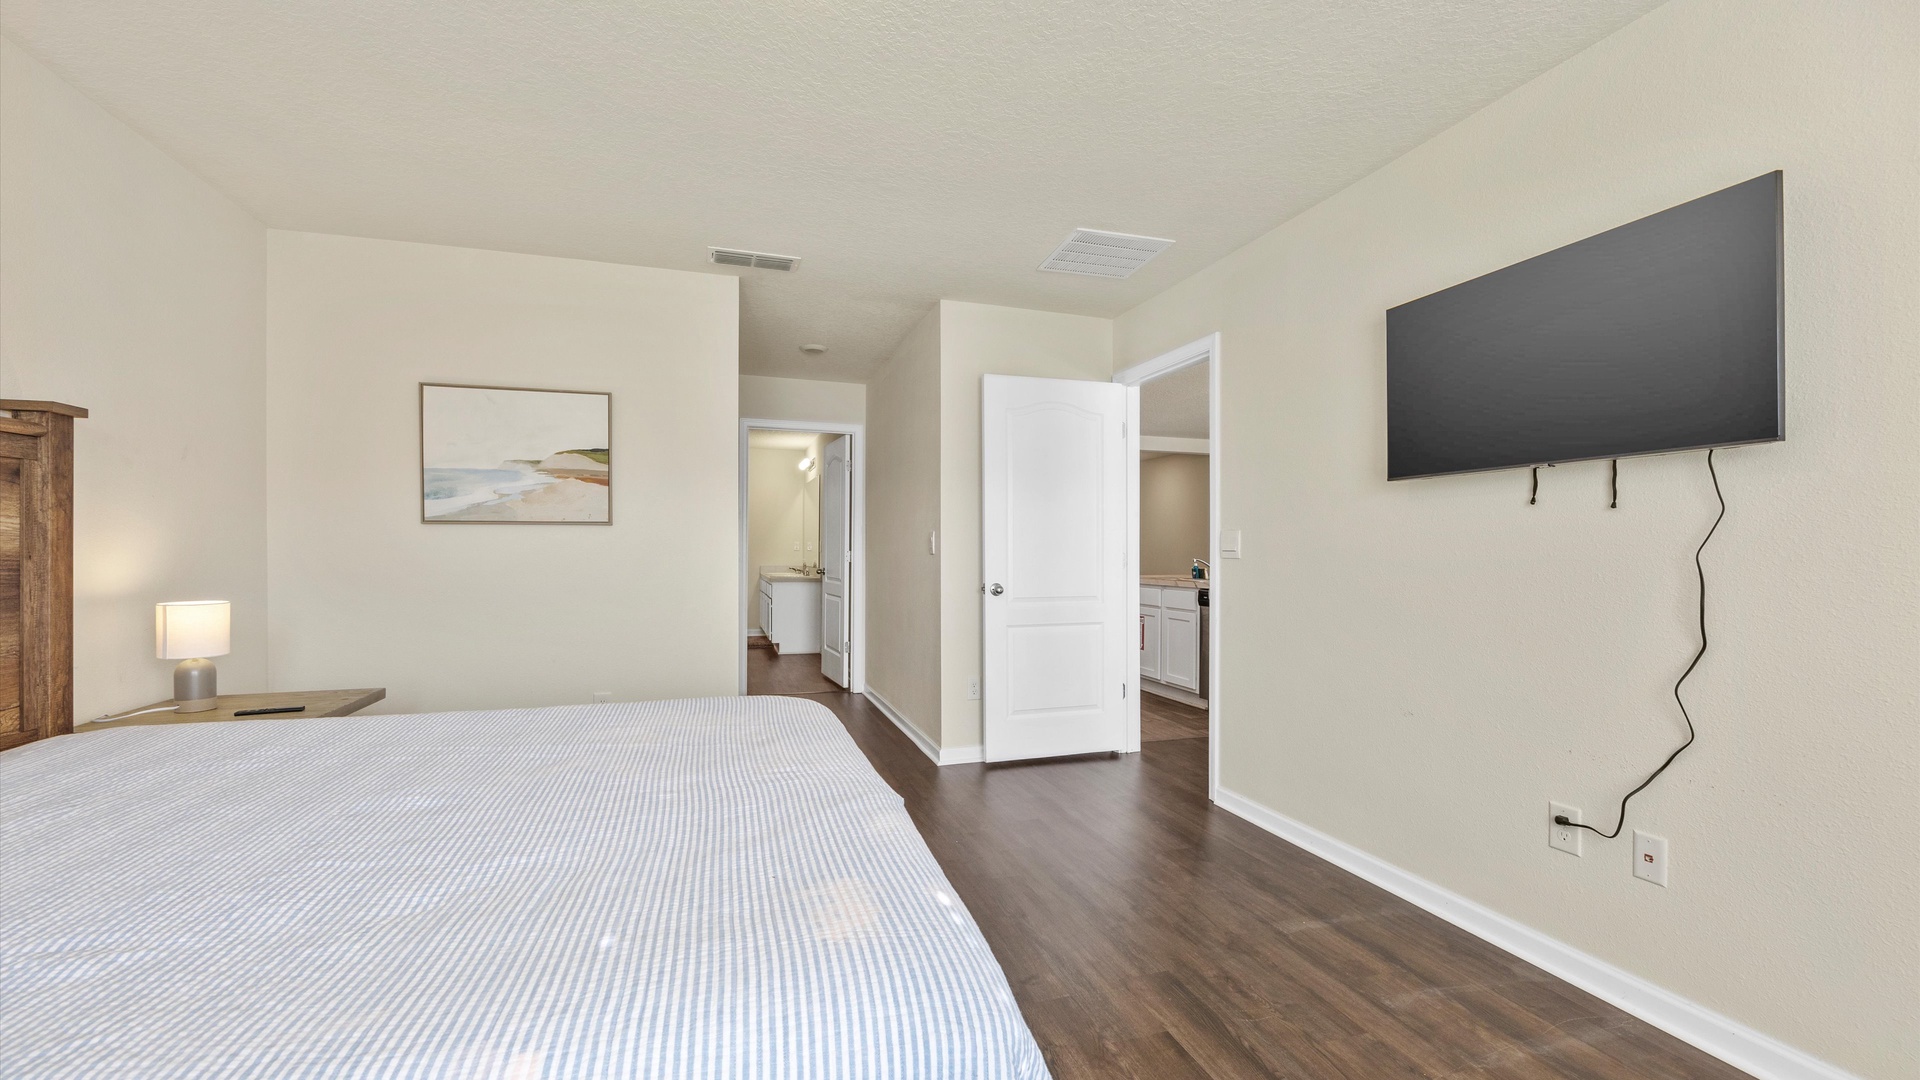 The master suite boasts a regal king bed, private ensuite, & Smart TV